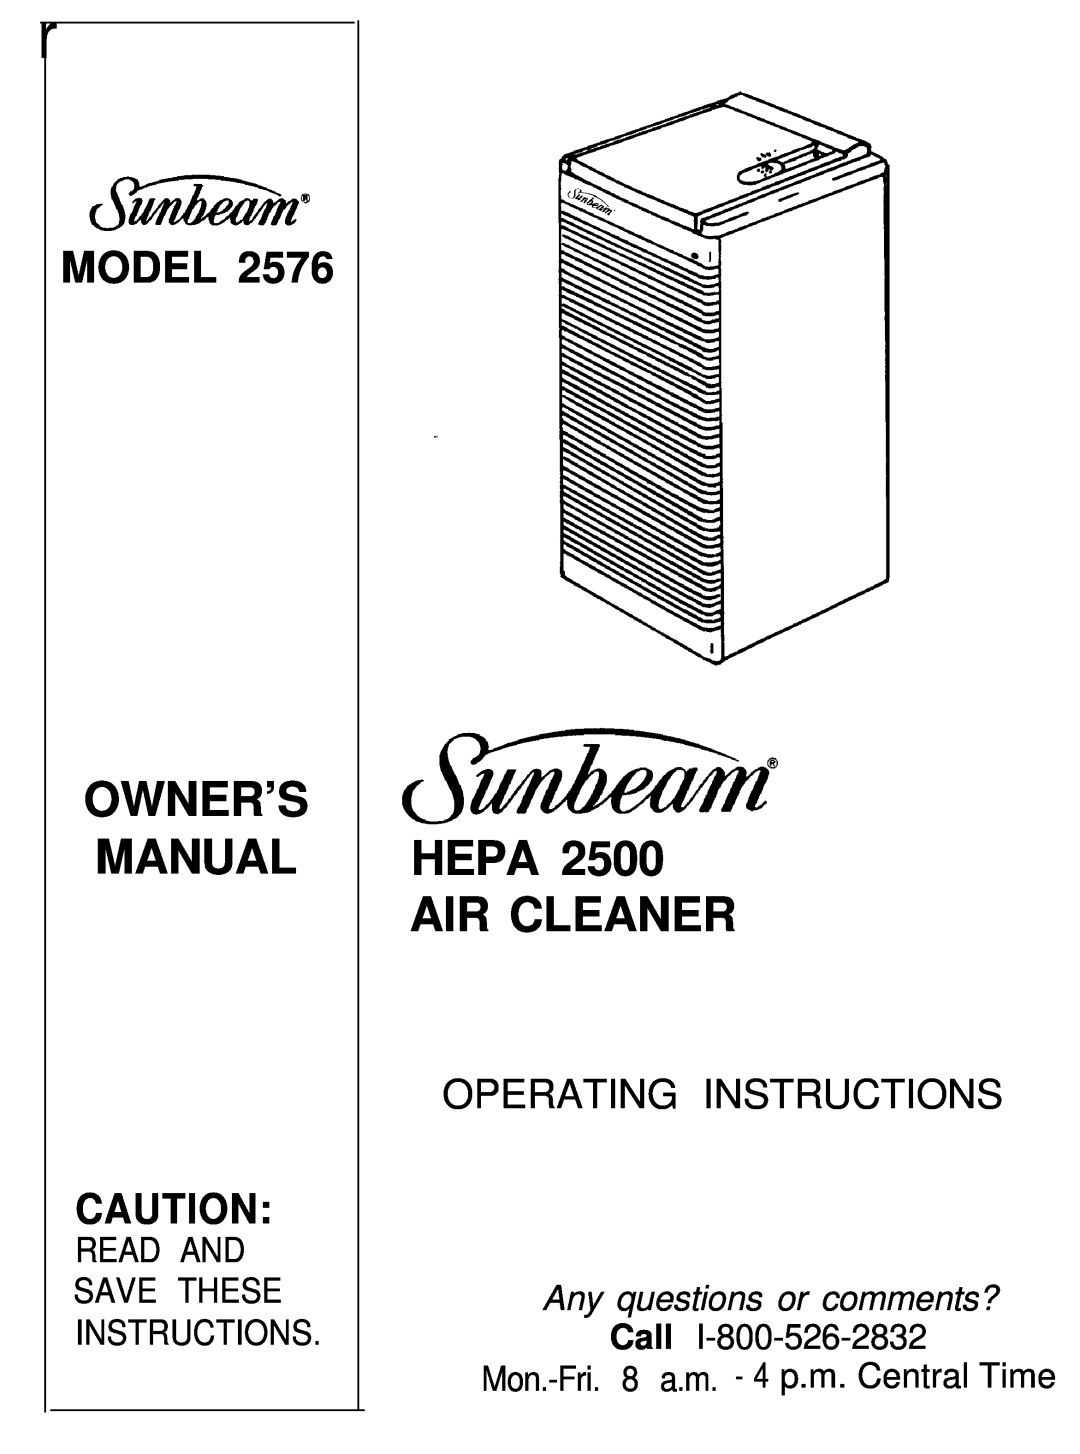 Sunbeam 2576 owner manual Hepa Air Cleaner, Call Mon.-Fri.8 a.m. - 4 p.m. Central Time, Model, Operating Instructions 